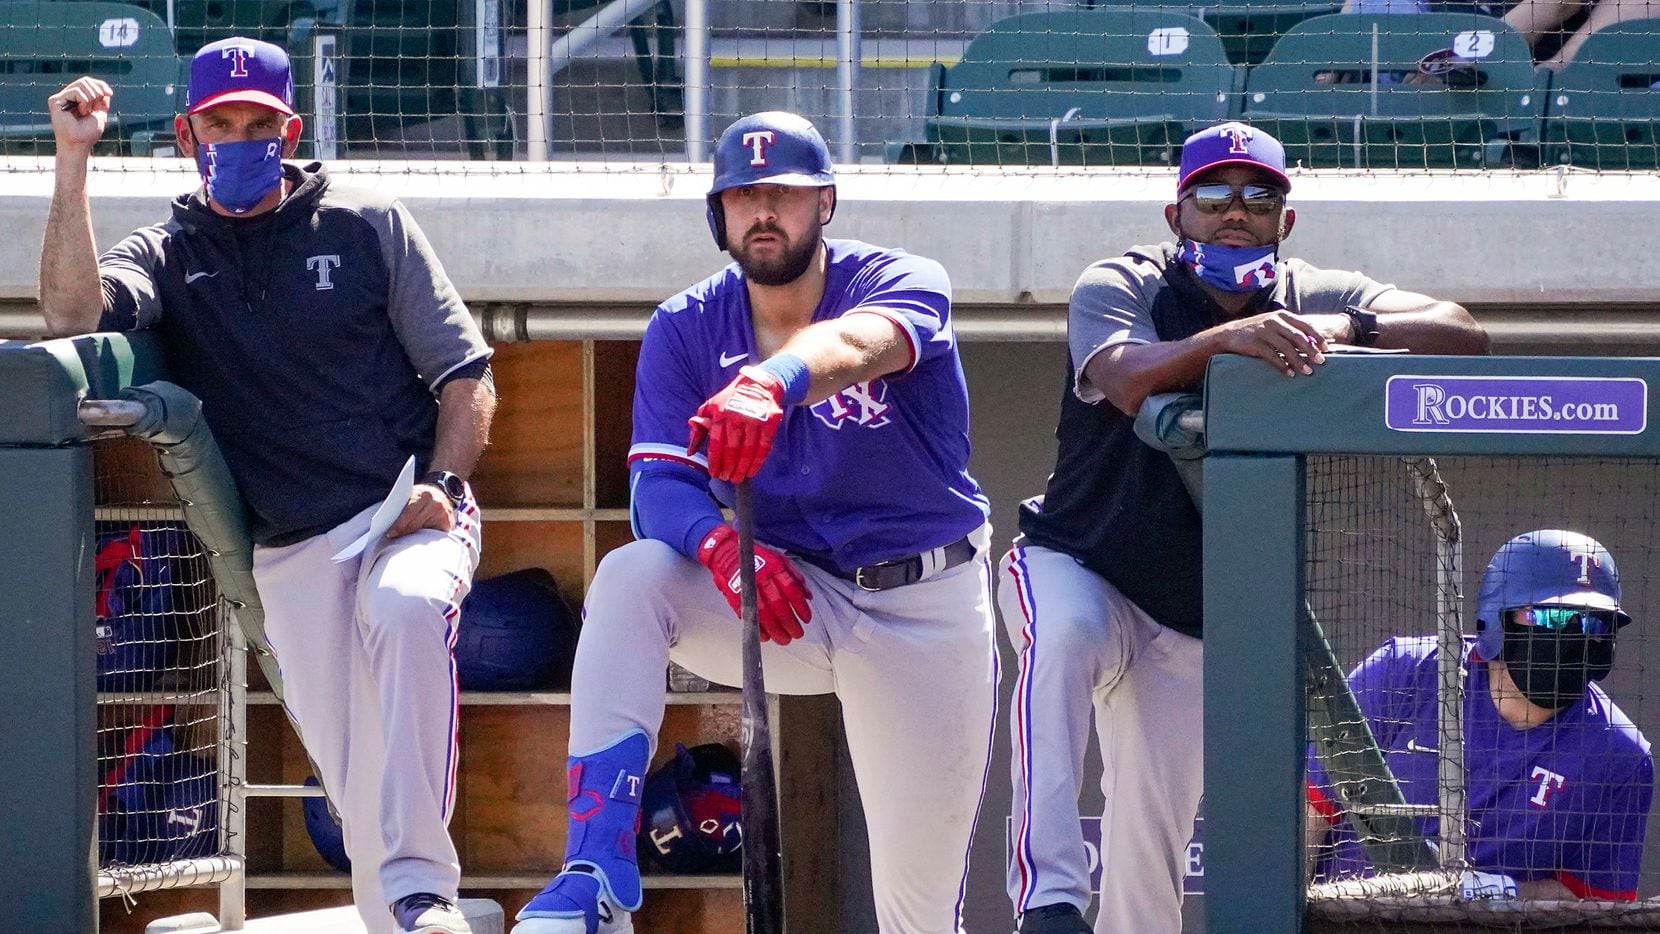 Texas Rangers manager Chris Woodward (left), outfielder Joey Gallo (center) and assistant hitting coach Callix Crabbe watch from the dugout during the third inning of a spring training game against the Arizona Diamondbacks at Salt River Fields at Talking Stick on Saturday, March 6, 2021, in Scottsdale, Ariz.